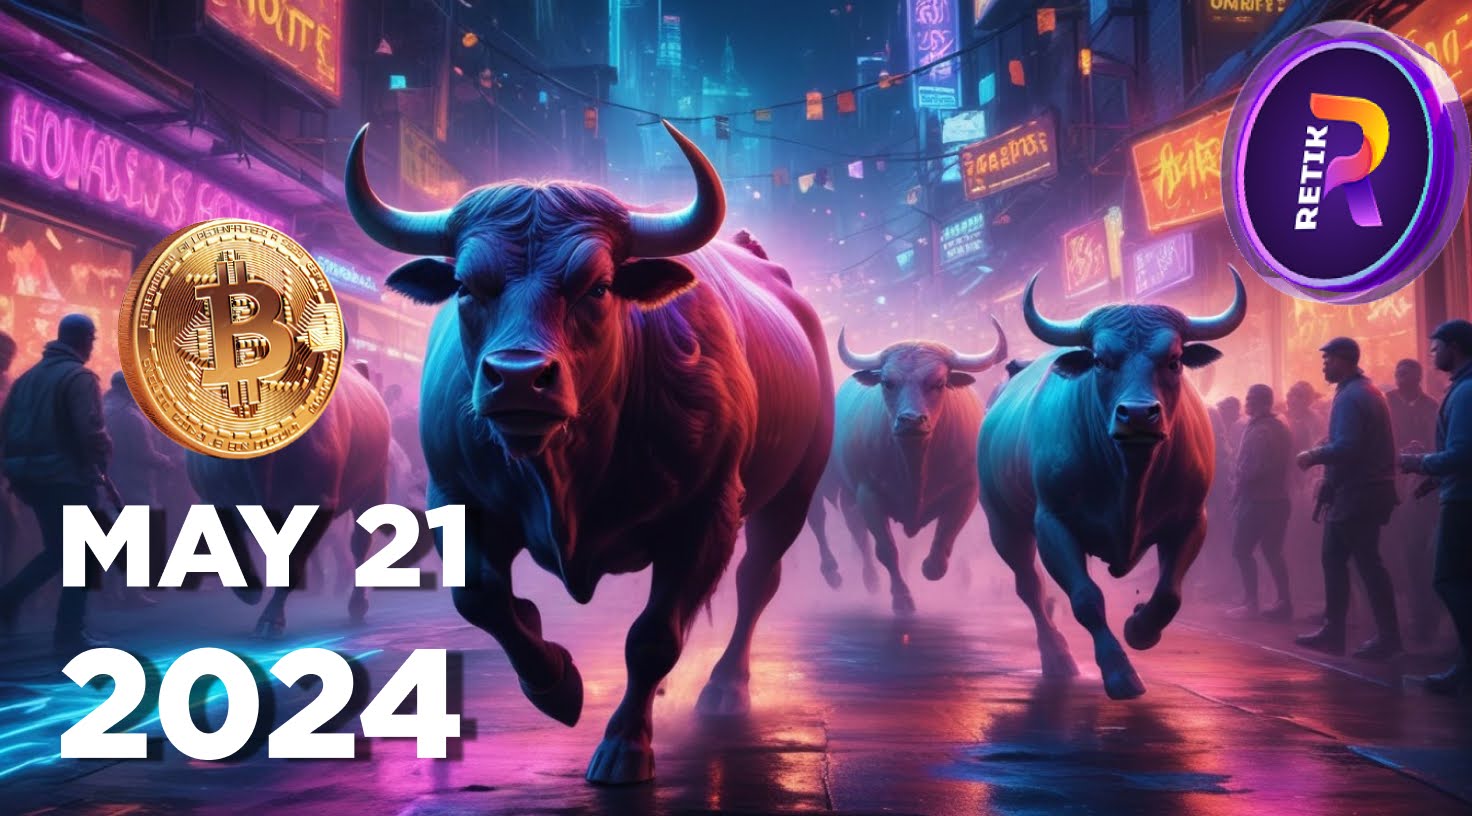 Popular Bitcoin Bull Holding $63,000,000 worth of BTC Says Solana Alternative Retik Finance (RETIK) Is a Must-Buy in 2024, Set to List on Top Exchange